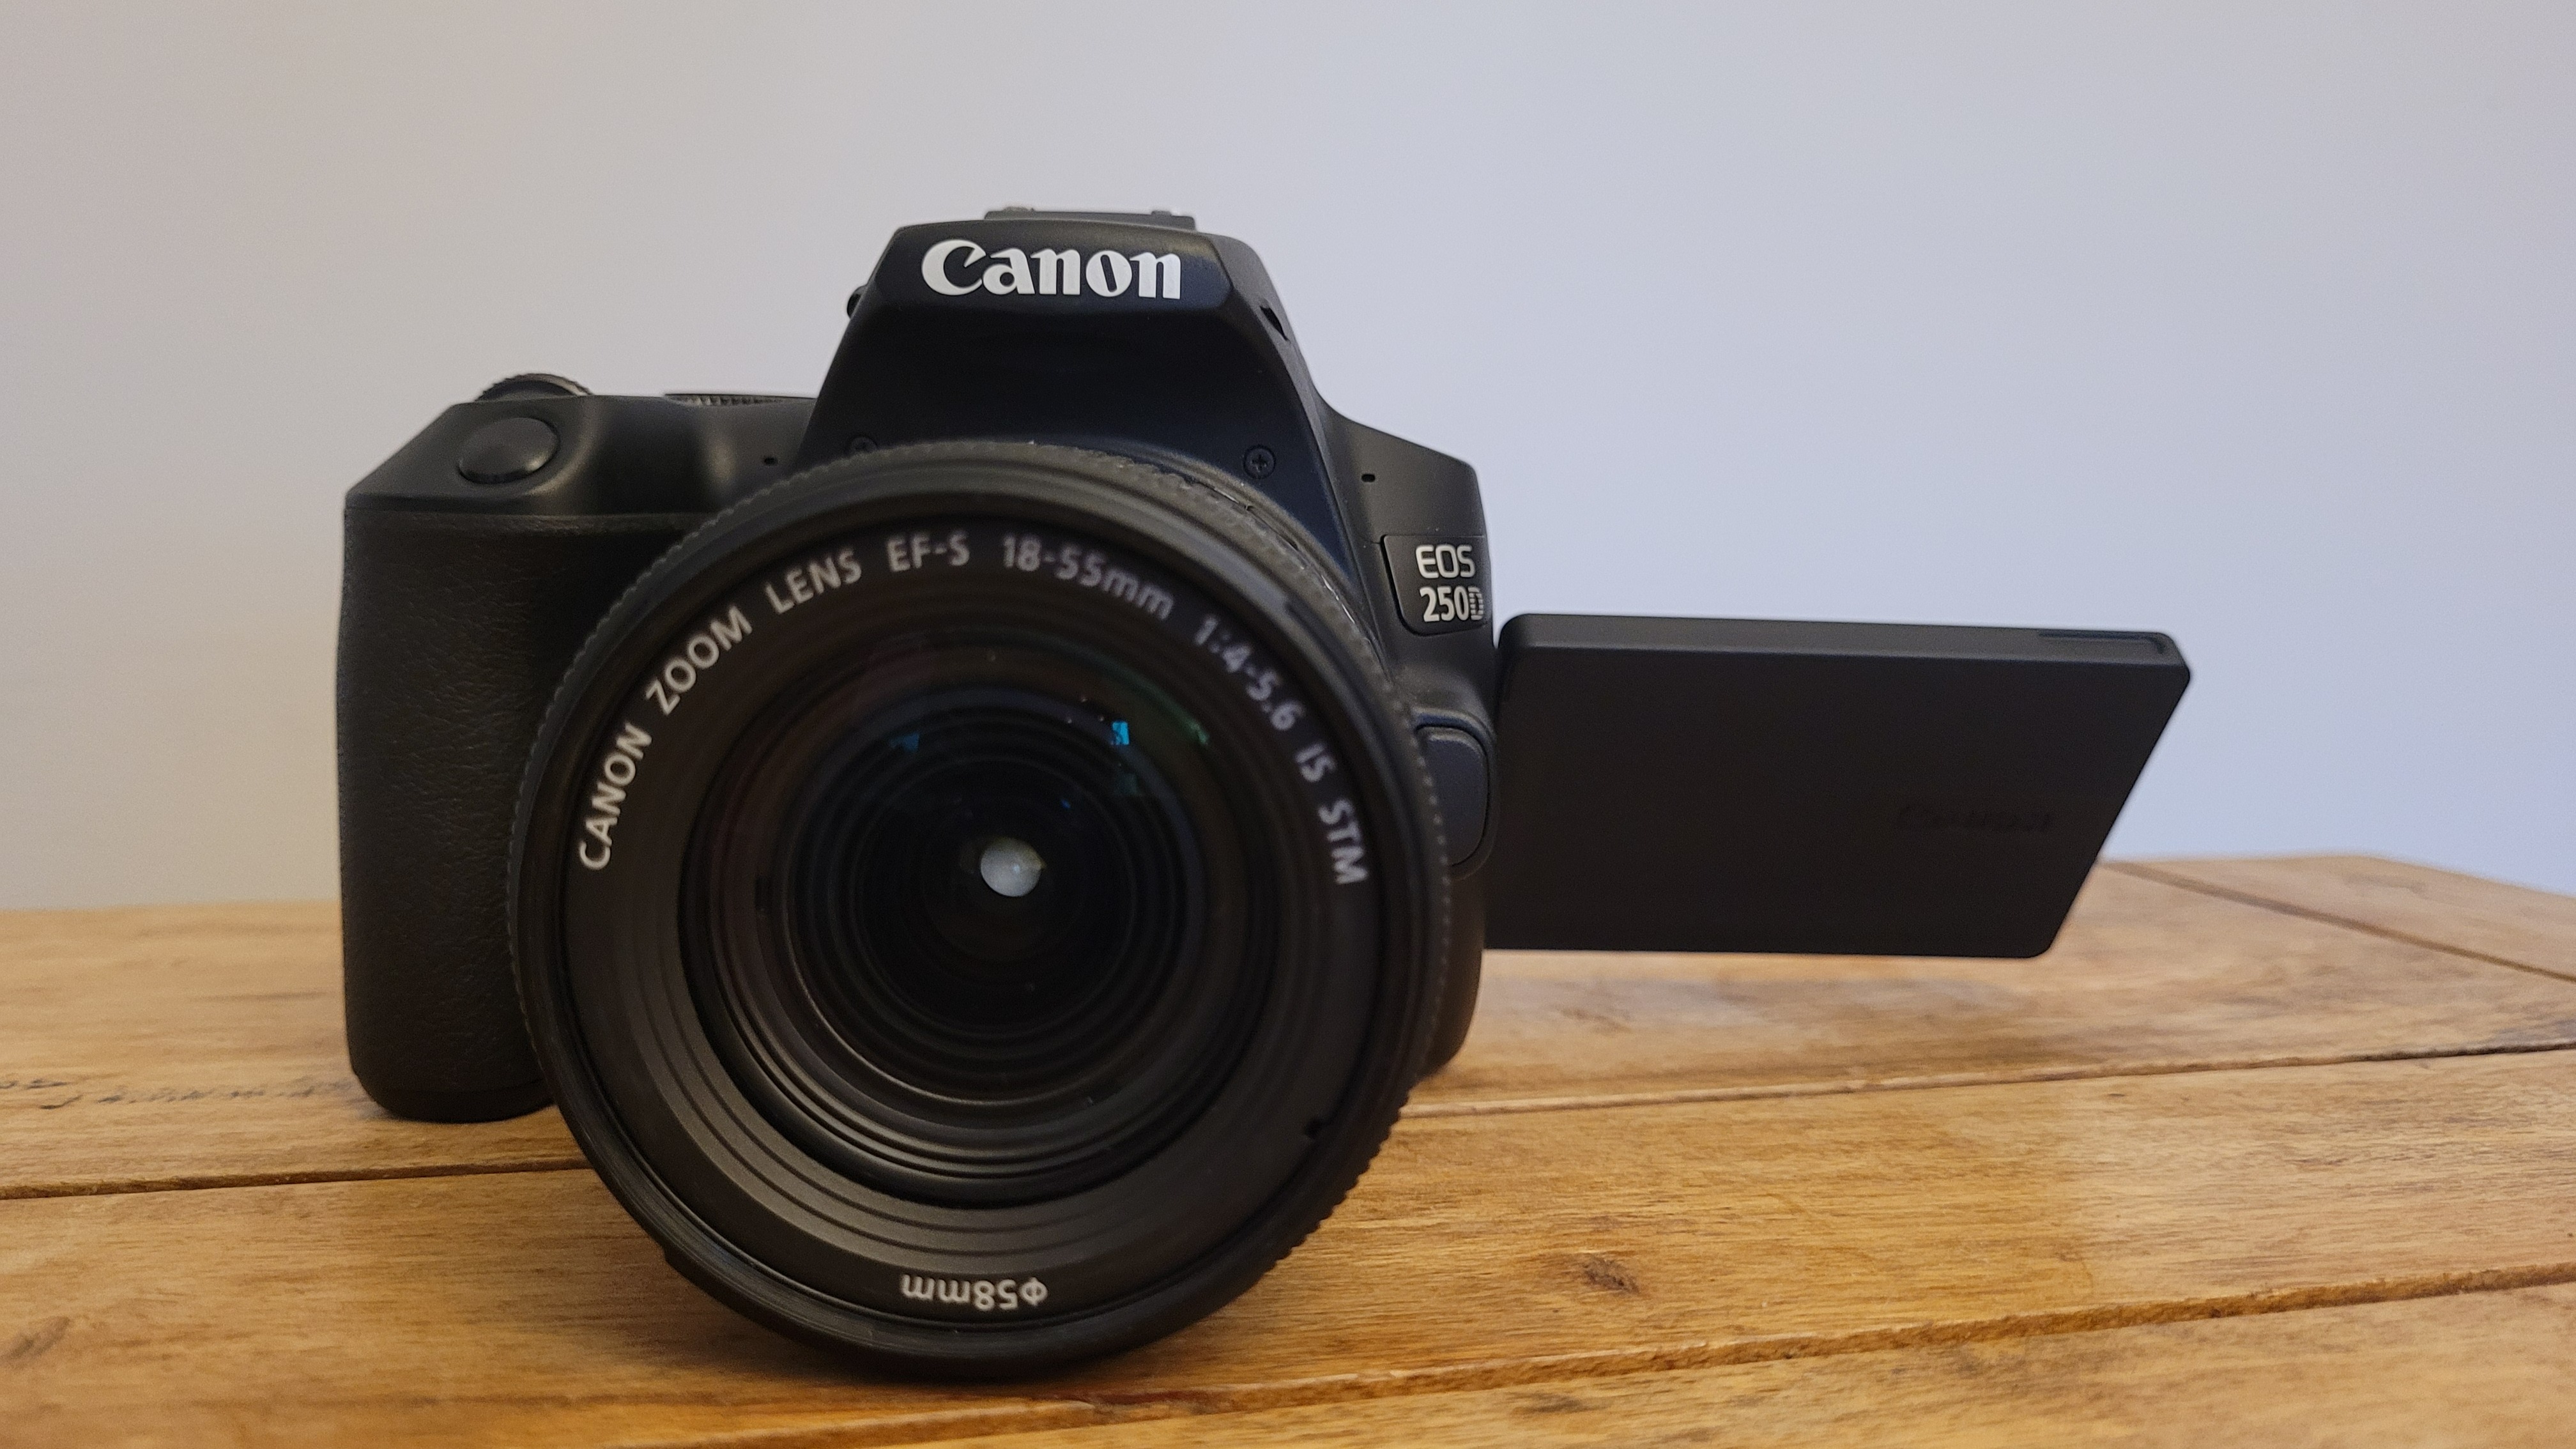 Canon Eos Rebel Sl3 Review | Space